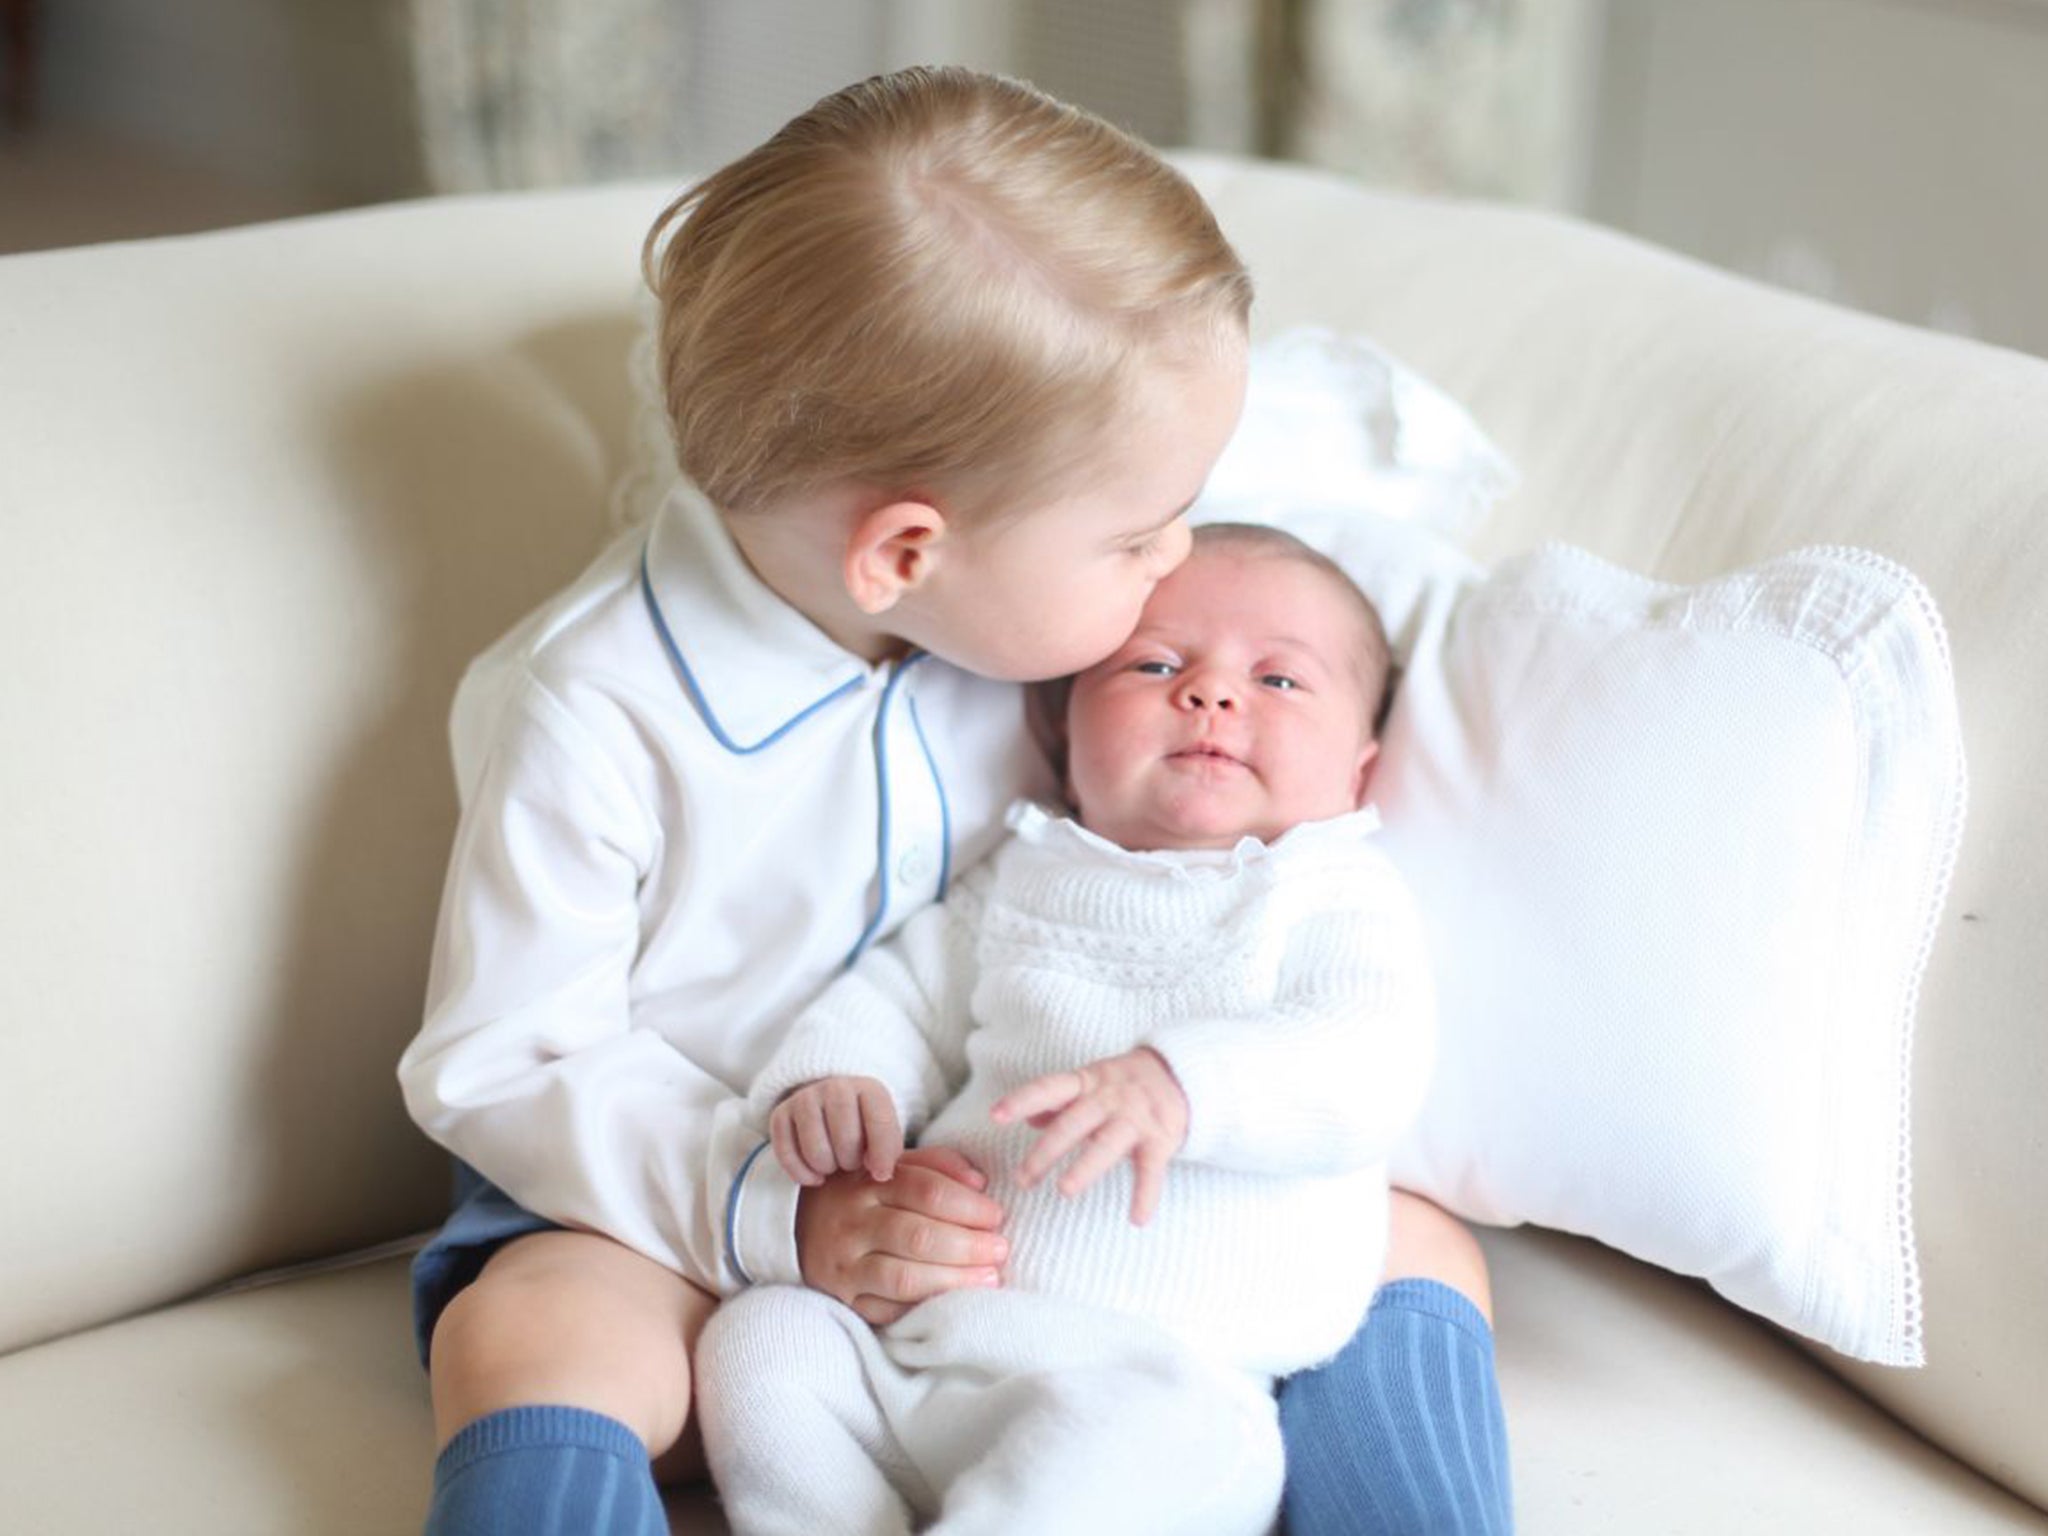 Breaking with royal tradition, the photographs of Prince George and Princess Charlotte were taken by their mother and feature the two royal siblings together